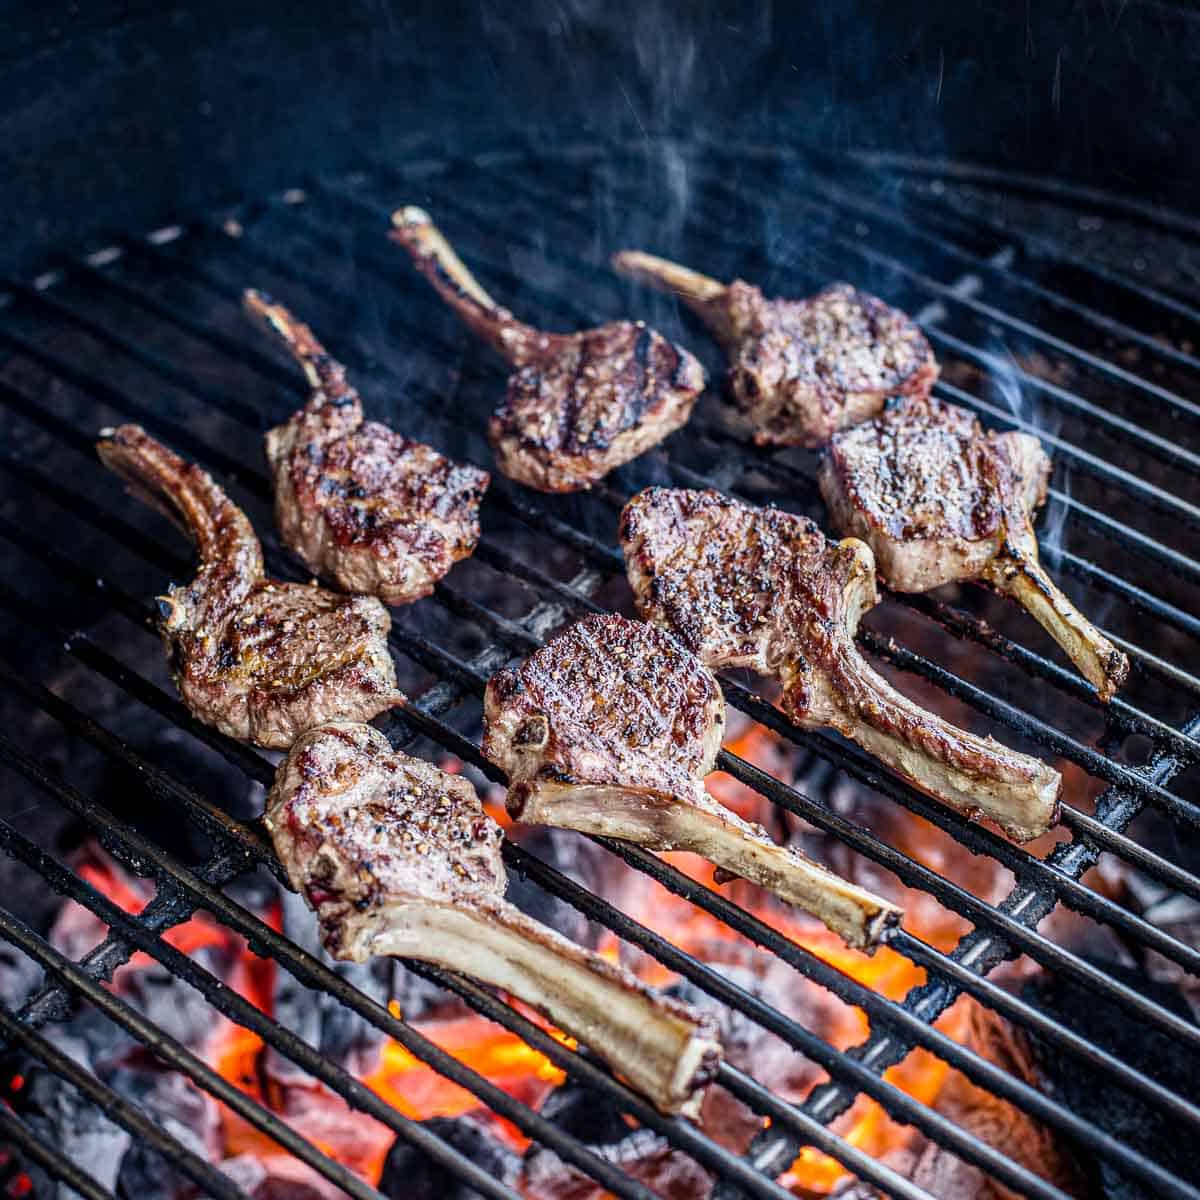 Grilled Lamb Chops - Amanda's Cookin' - On the Grill